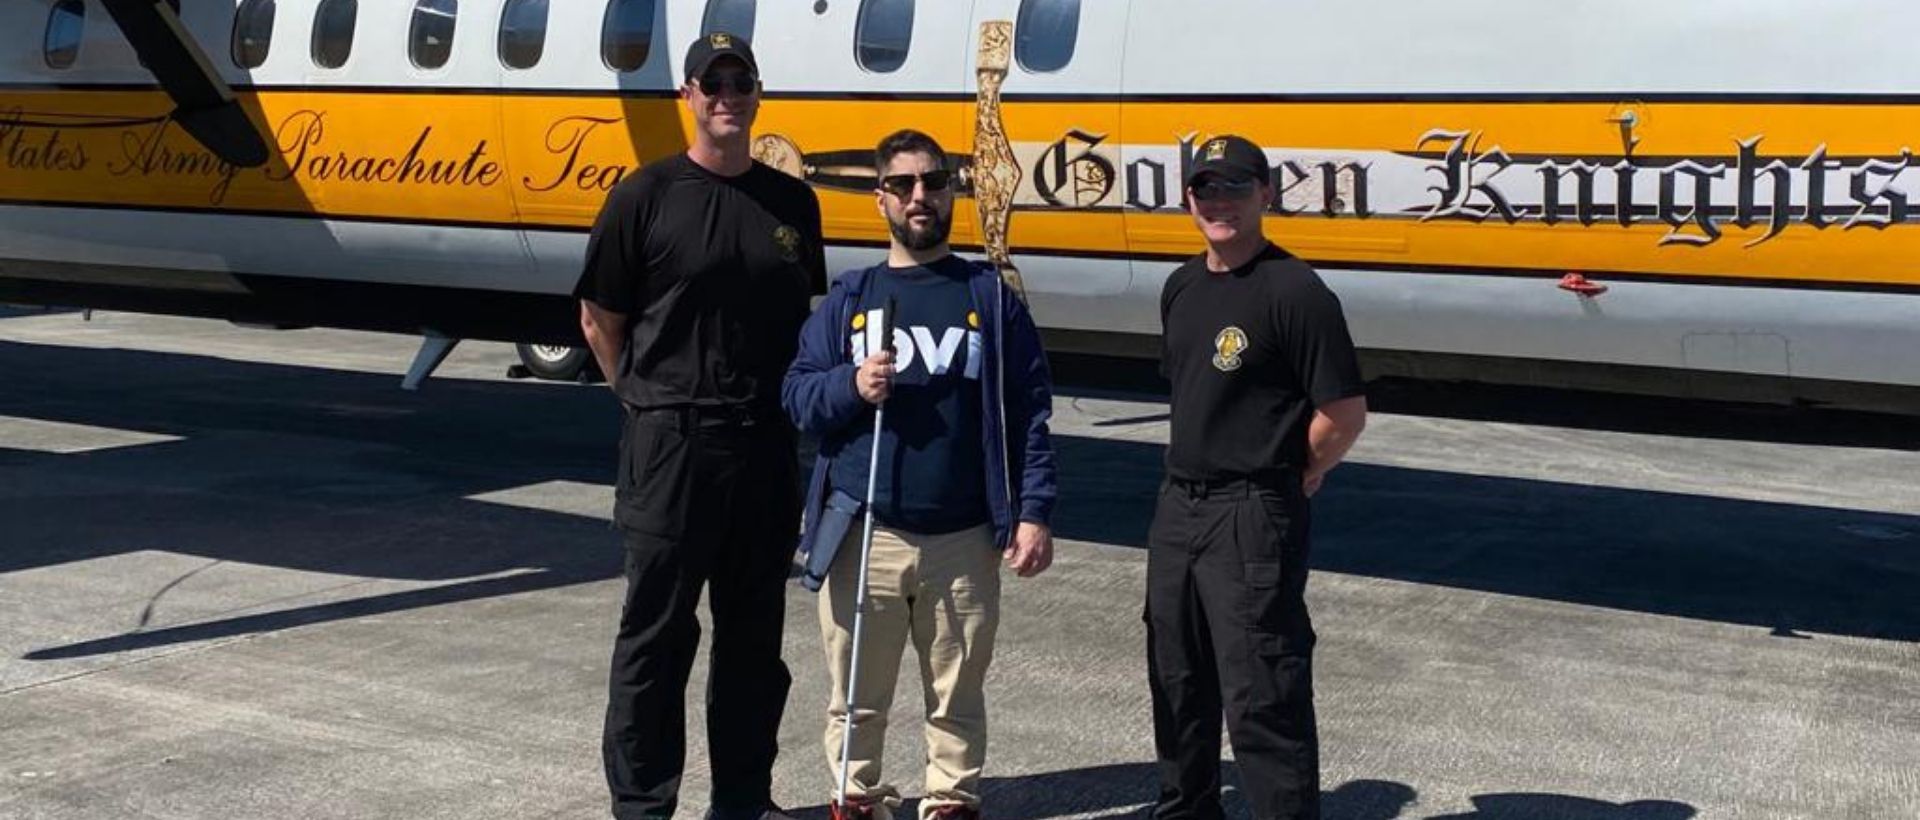 Man in IBVI shirt holding a cane standing with two other men in front of a plane